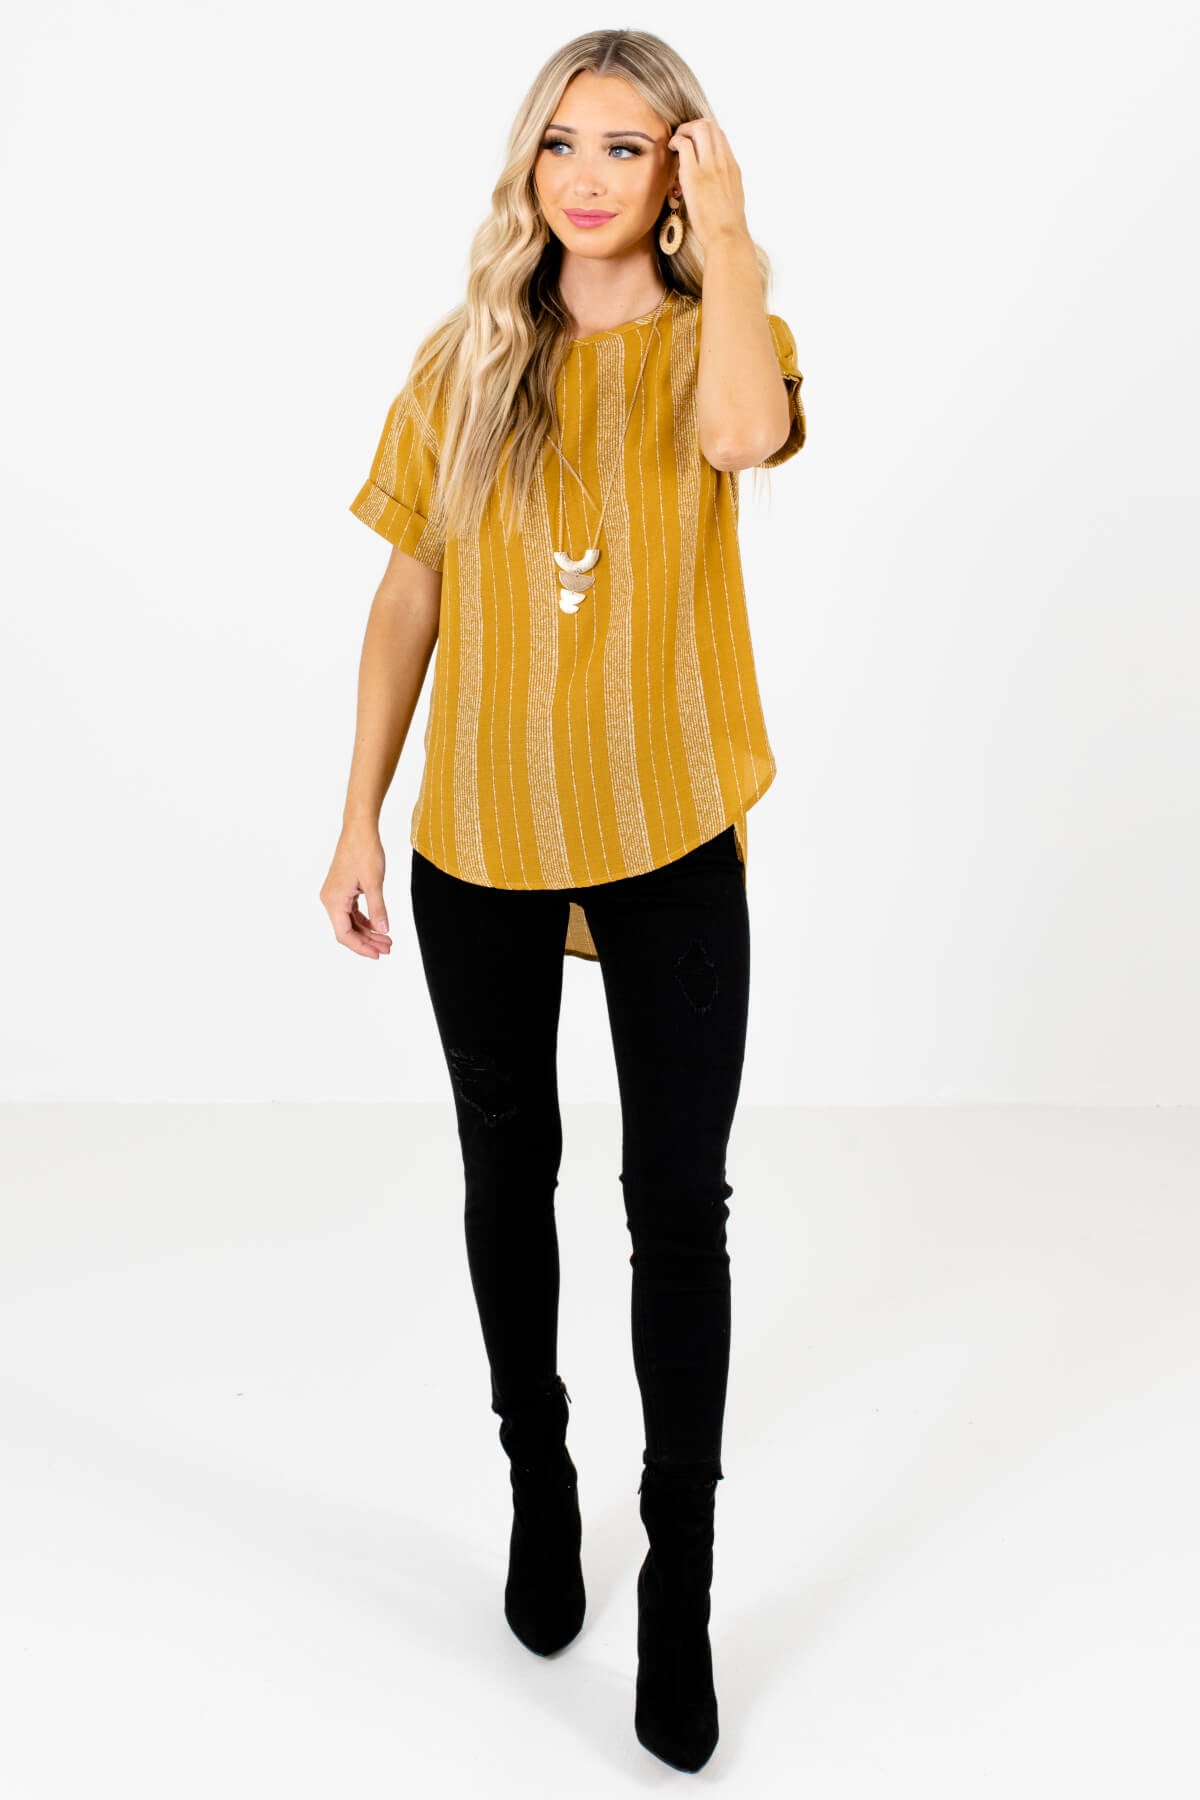 Women's Mustard Yellow Fall and Winter Boutique Clothing